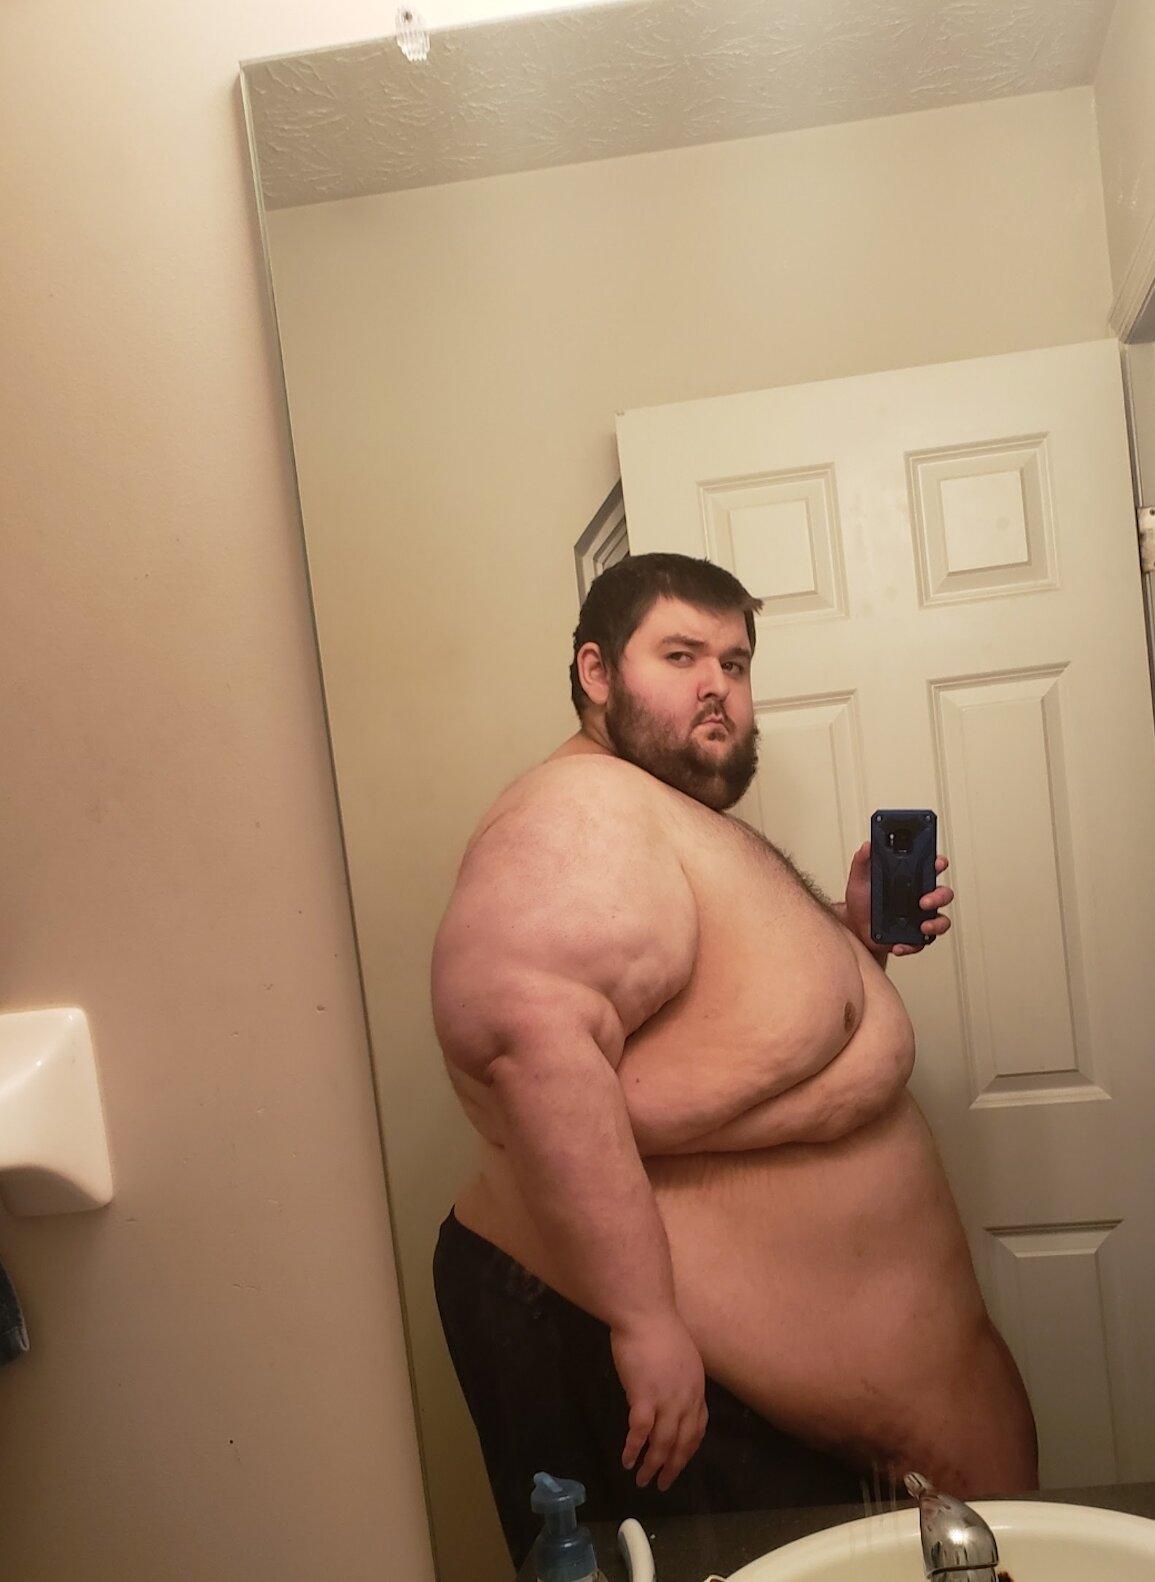 Mr. Muncy before his weight loss journey began. (Courtesy of <a href="https://www.facebook.com/profile.php?id=61553005500871">Zach Muncy</a>)